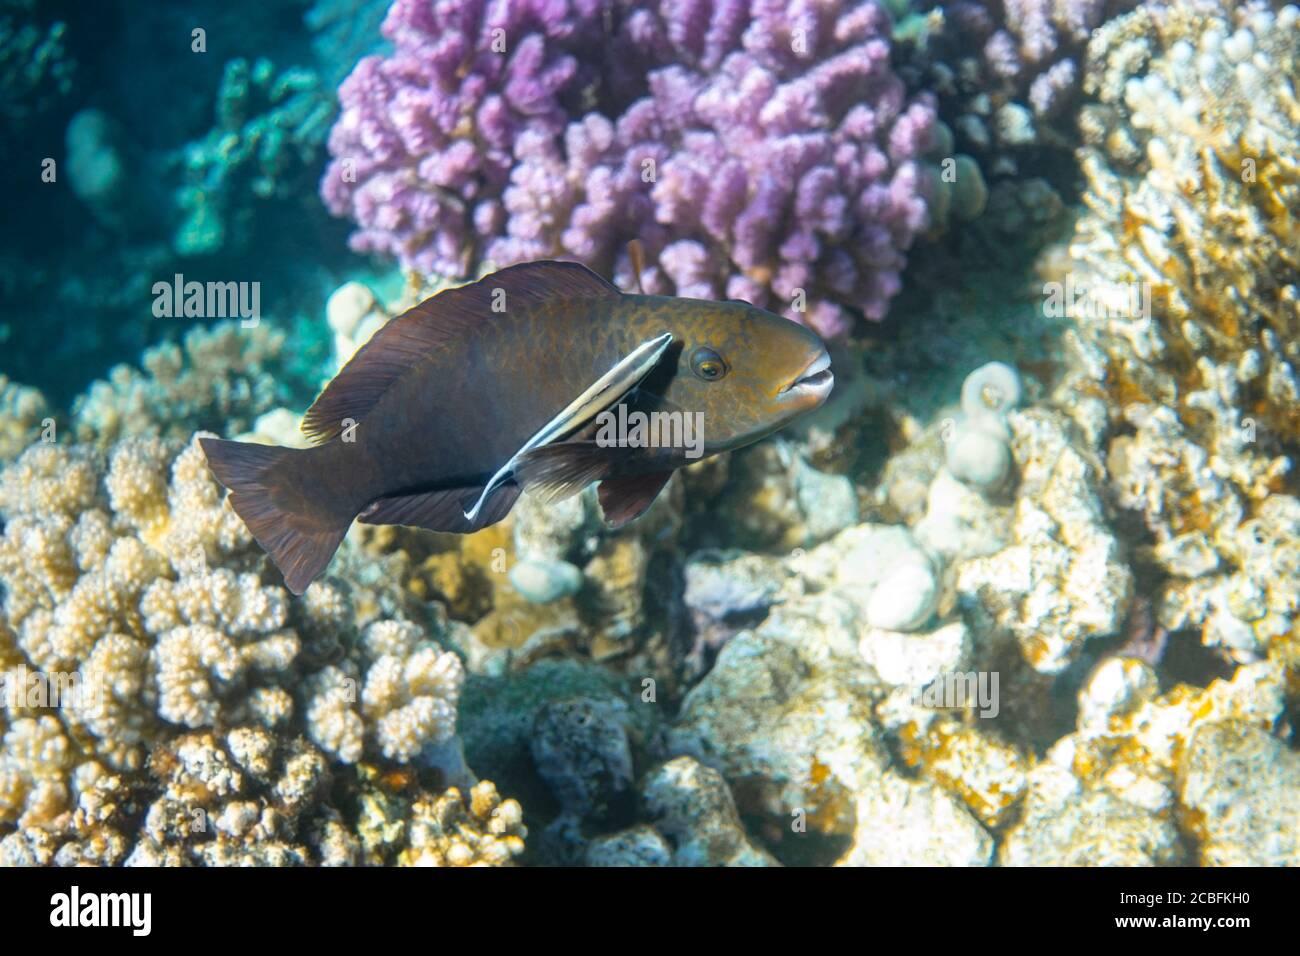 Cleaner fish (bluestreak cleaner wrasse)  and black parrotfish in Red Sea, Egypt. Close-up, side view. Amazing cleaning symbiosis in nature. Colorful Stock Photo